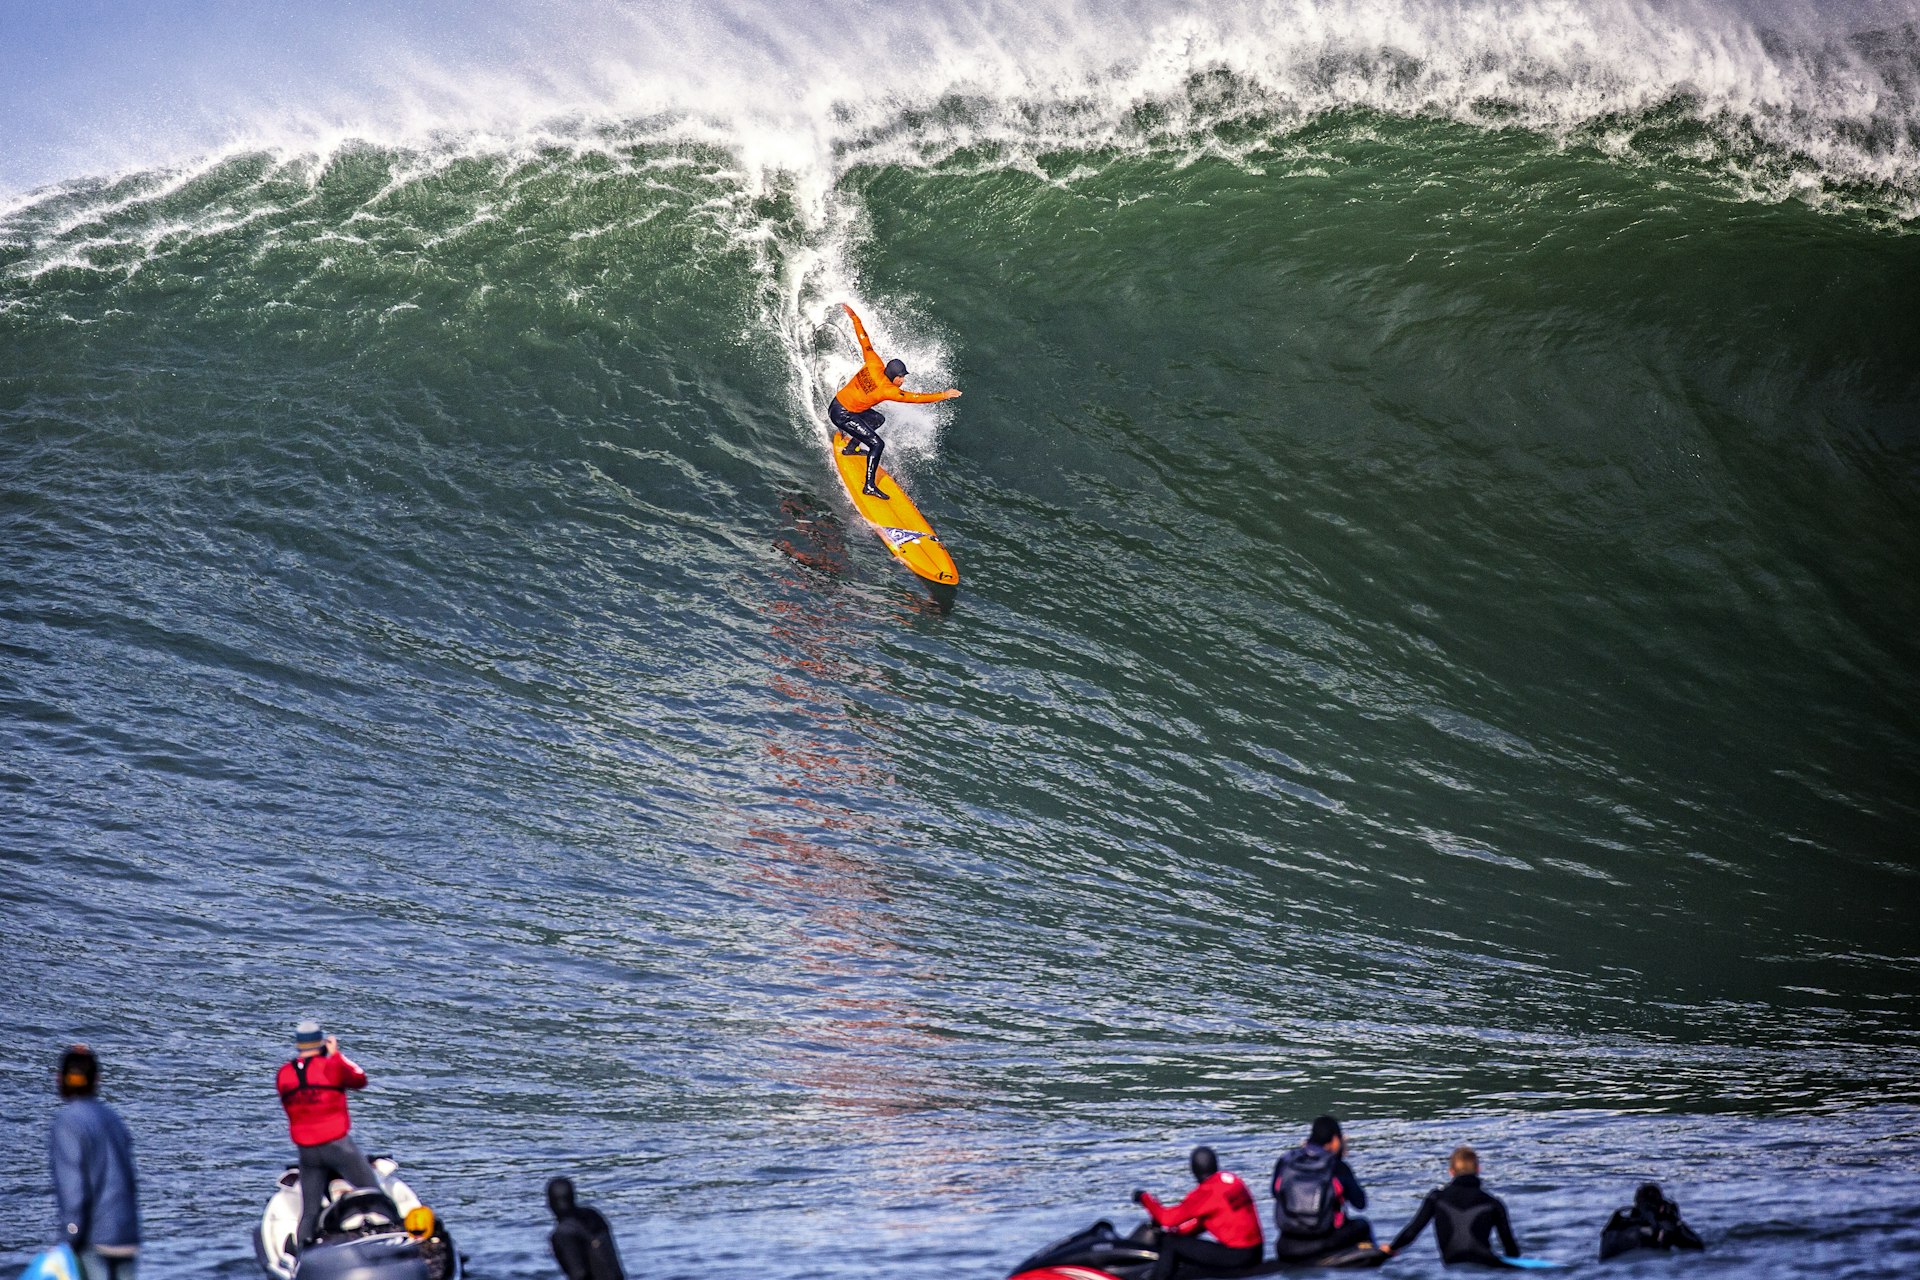 A surfer tops a wave heading towards a series of onlookers sat on jet skis